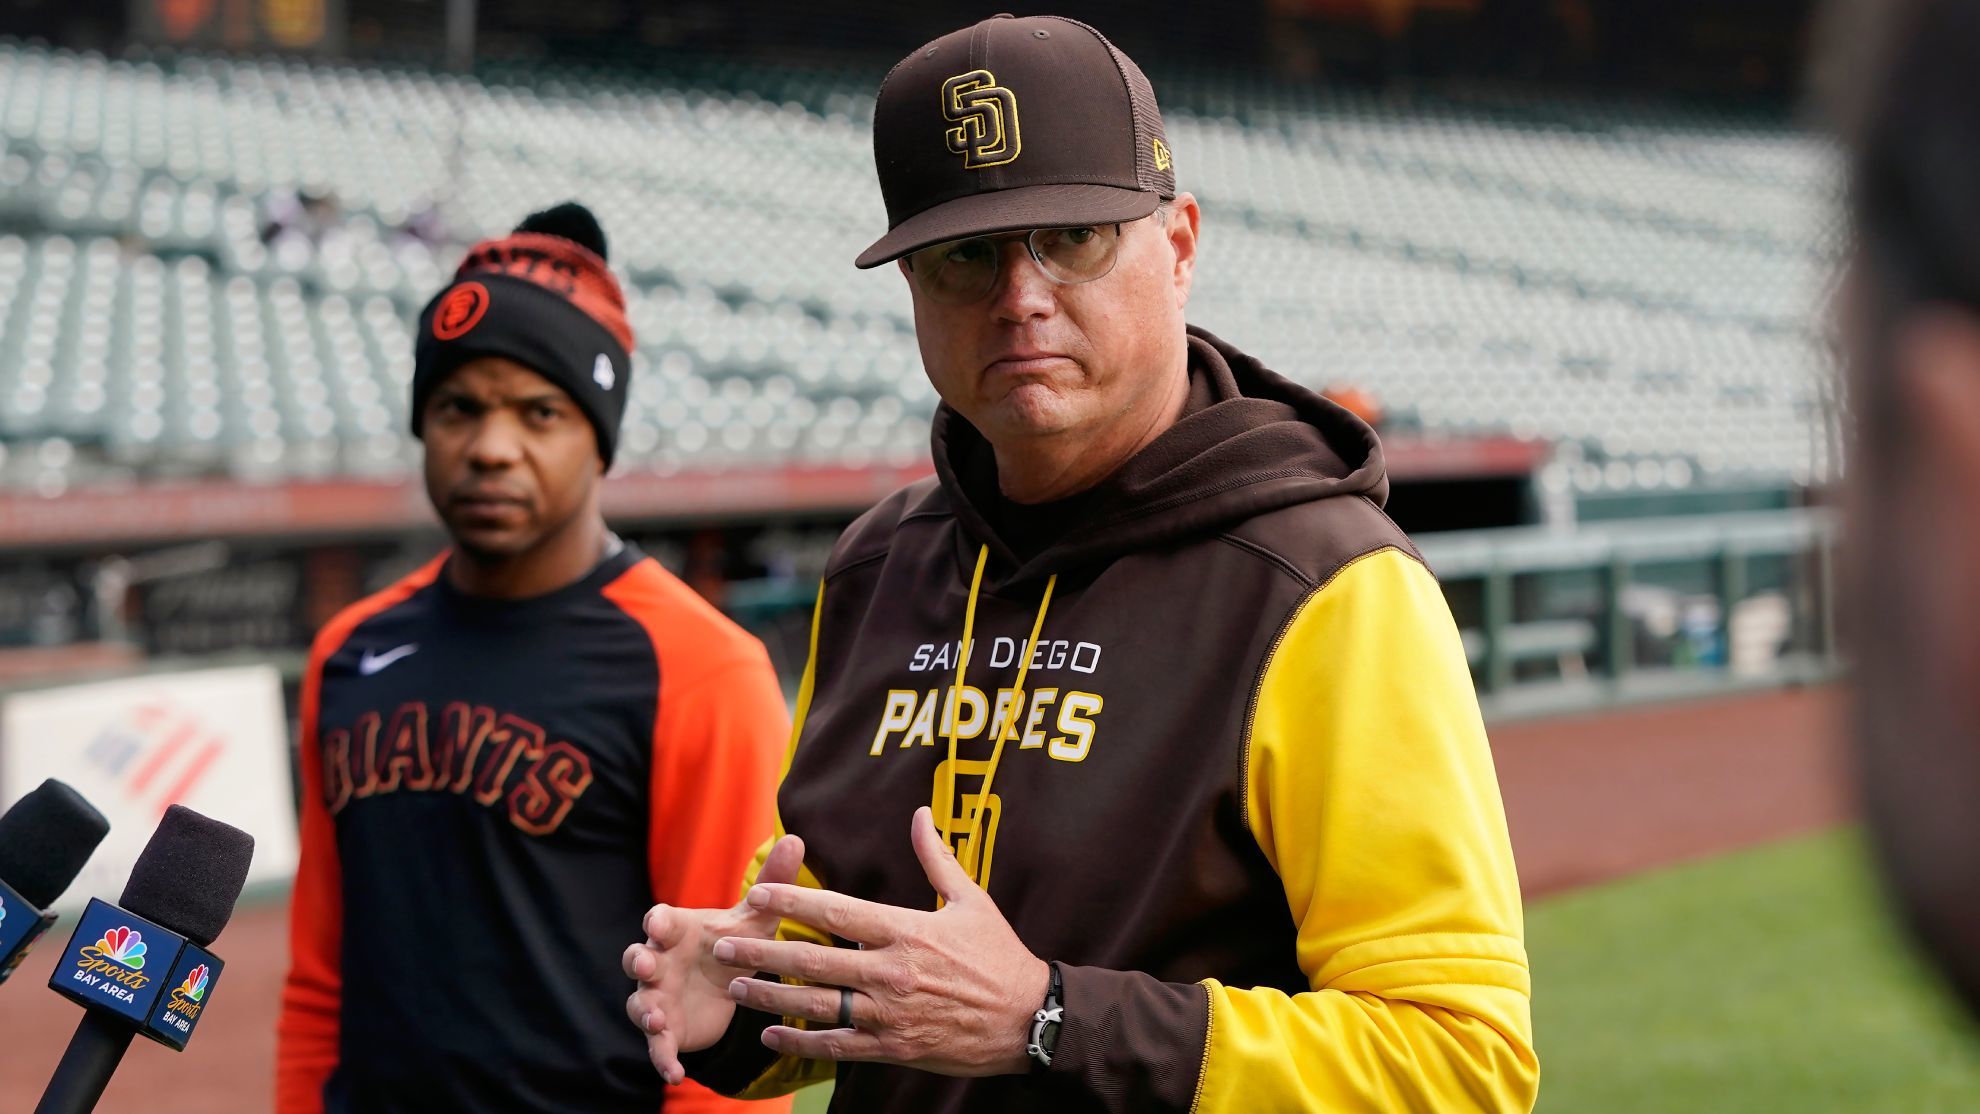 Giants coach Antoan Richardson and Padres coach Mike Shildt.